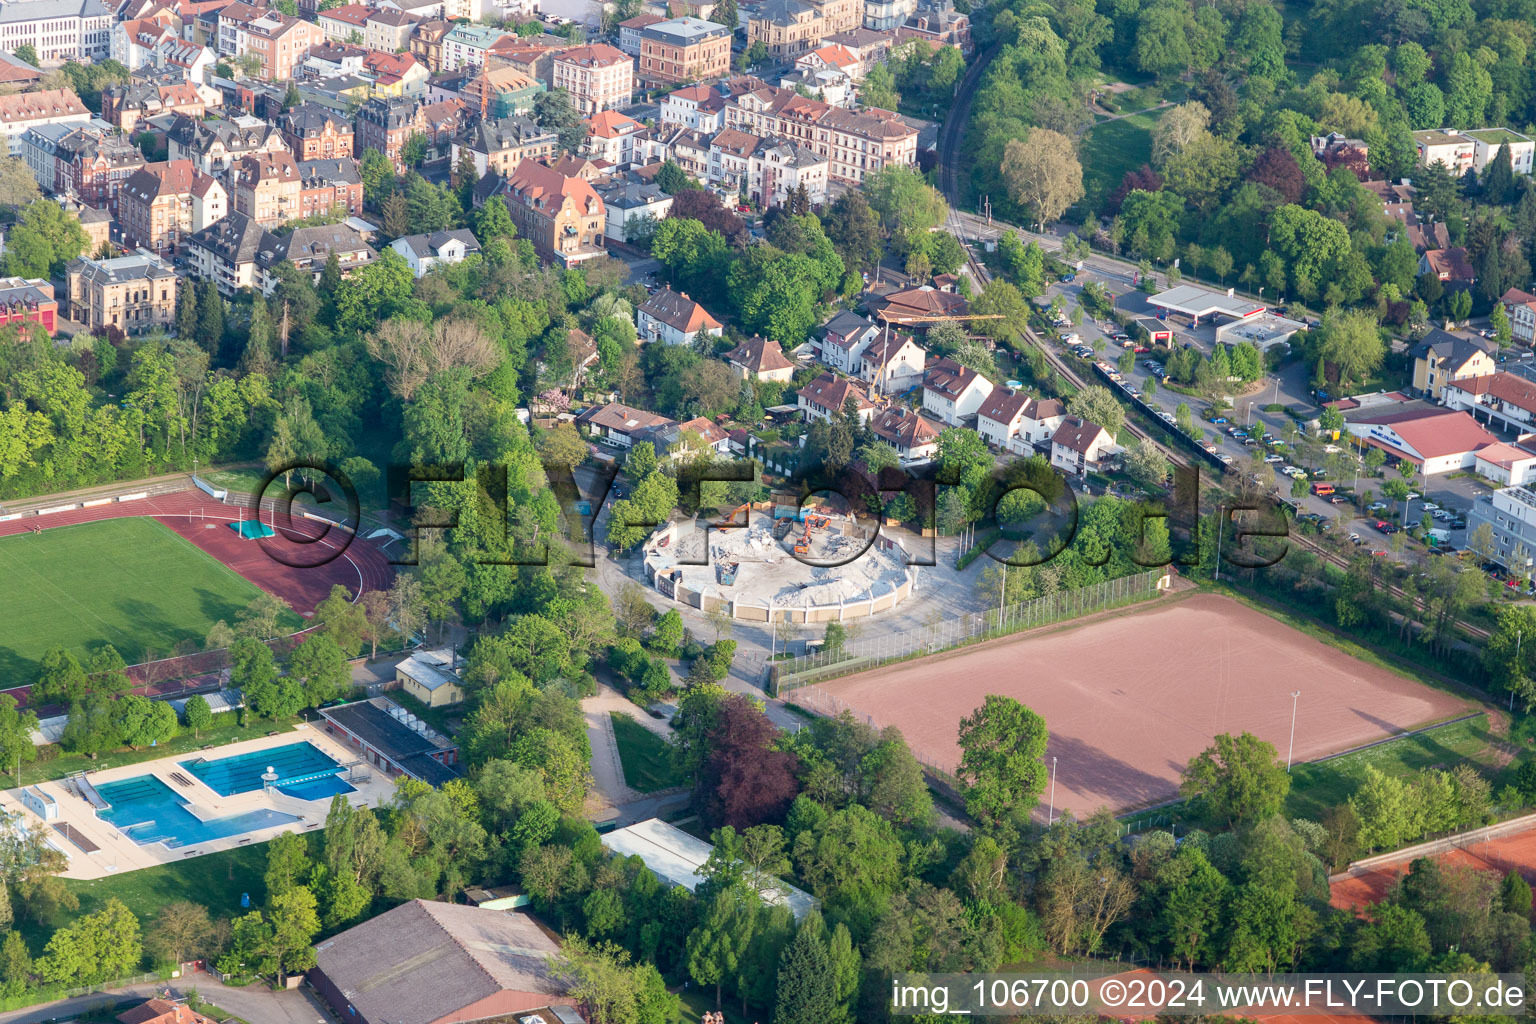 Aerial view of Demolition of the circular sports hall in Landau in der Pfalz in the state Rhineland-Palatinate, Germany